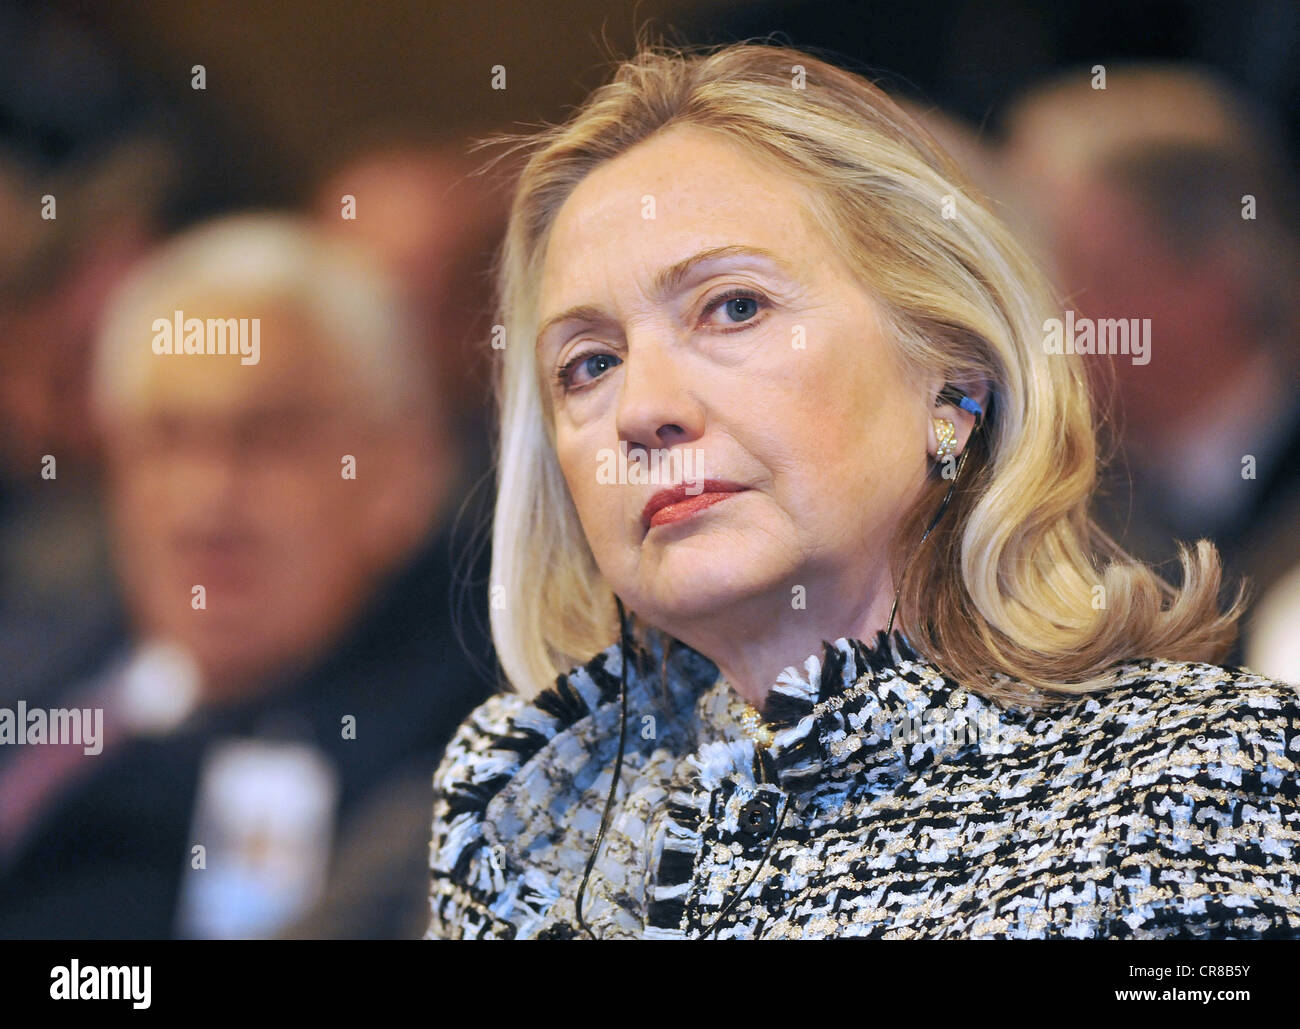 Clinton, Hillary, * 26.10.1947, American politician,  (Democrates) First Lady 1992 - 2000, governor of New York since 2001, portrait, with Henry Kissinger, speaker at the Munich Conference on Security Policy, Munich, Germany, 4.2.2012, Stock Photo